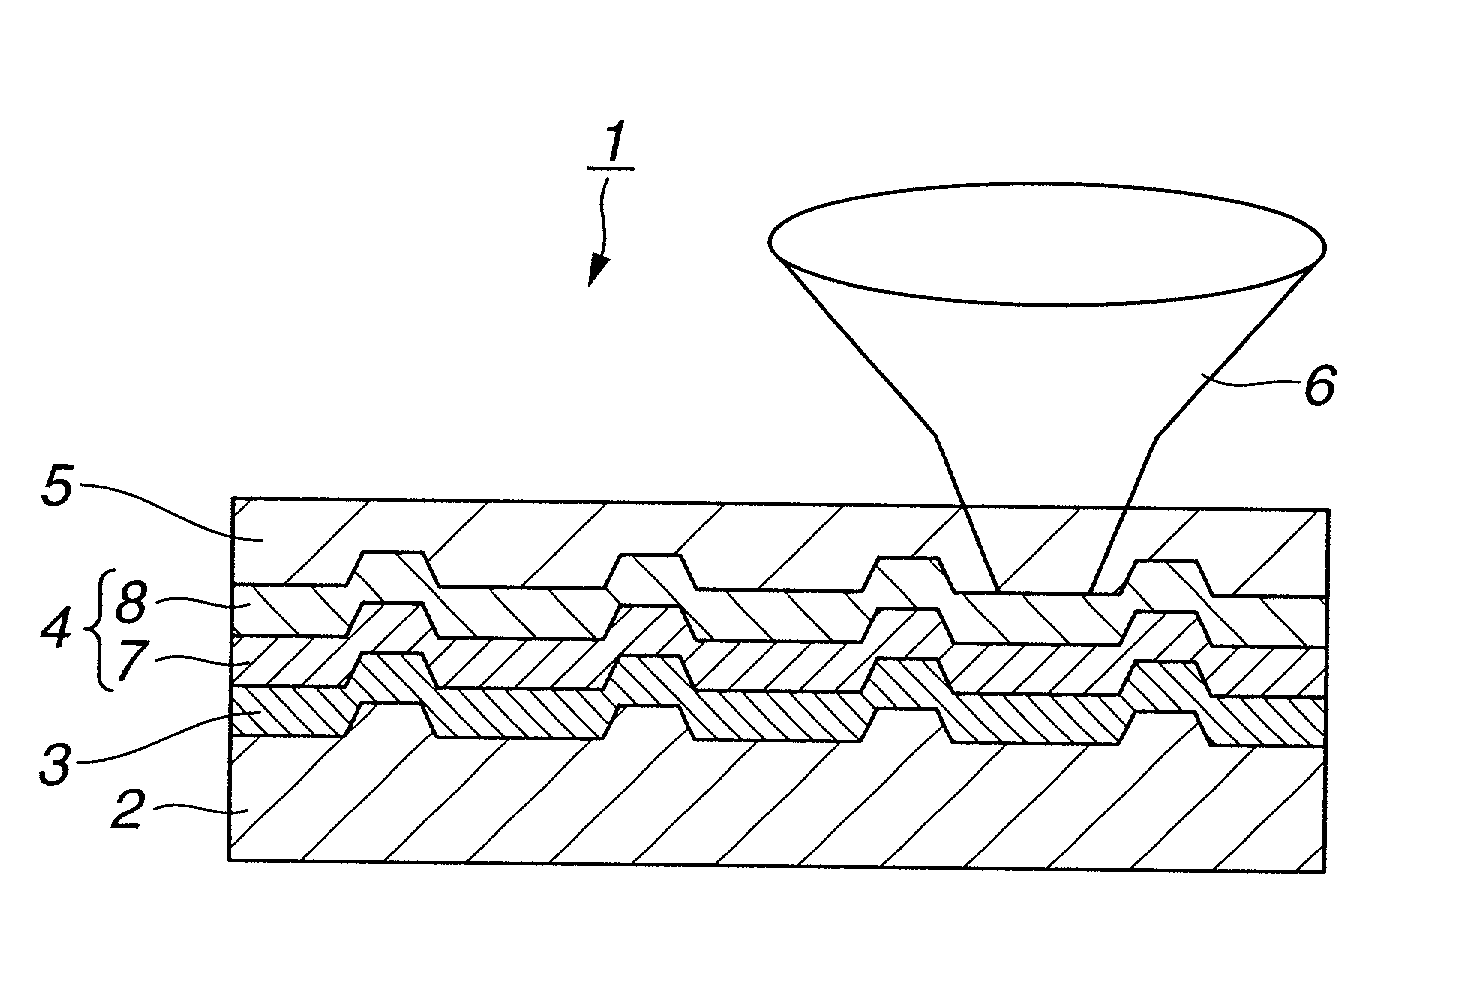 Optical storage medium having an organic recording layer attached to a dielectric layer